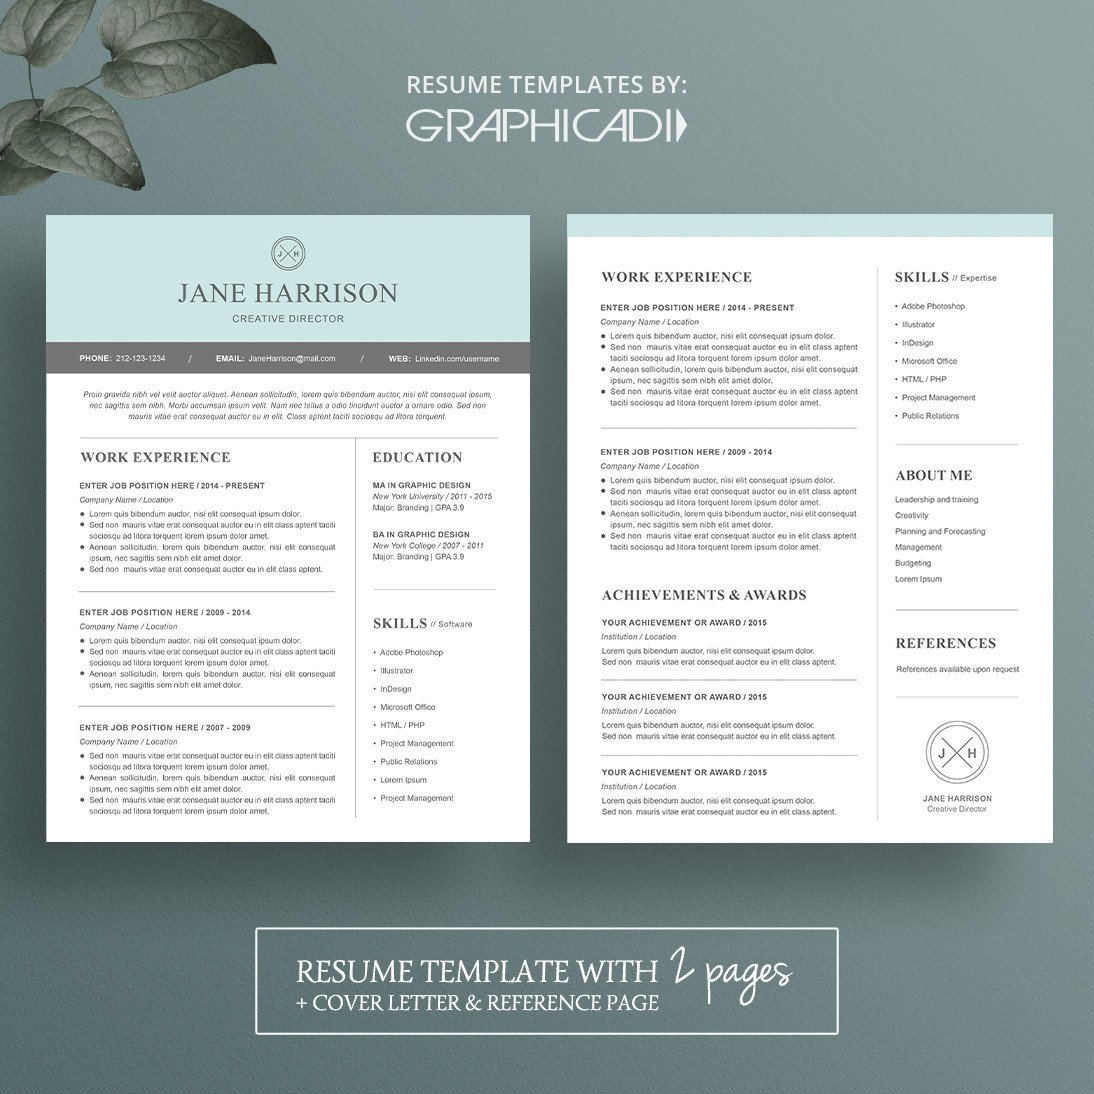 Modern Resume Template for Microsoft Word LimeResumes